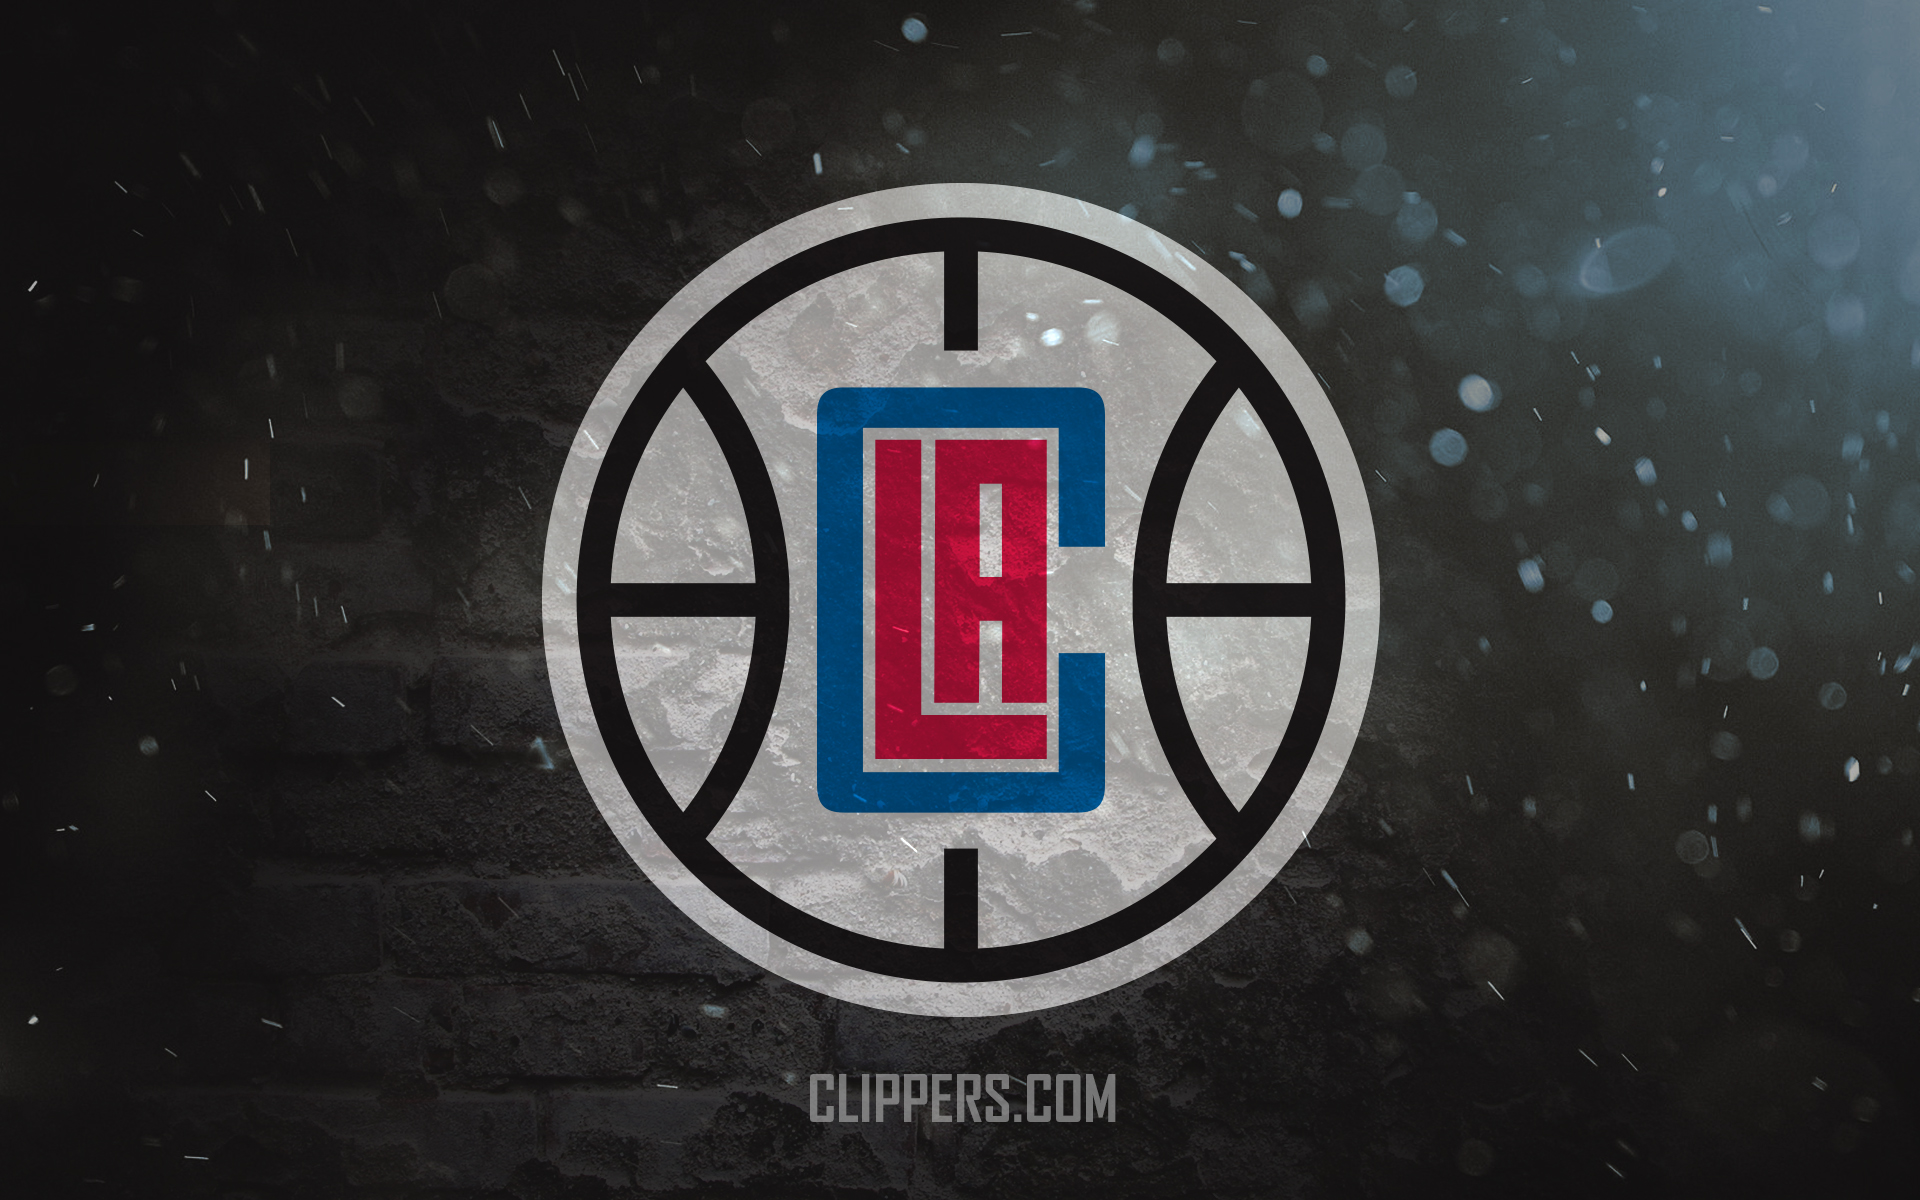 Clippers wallpaper